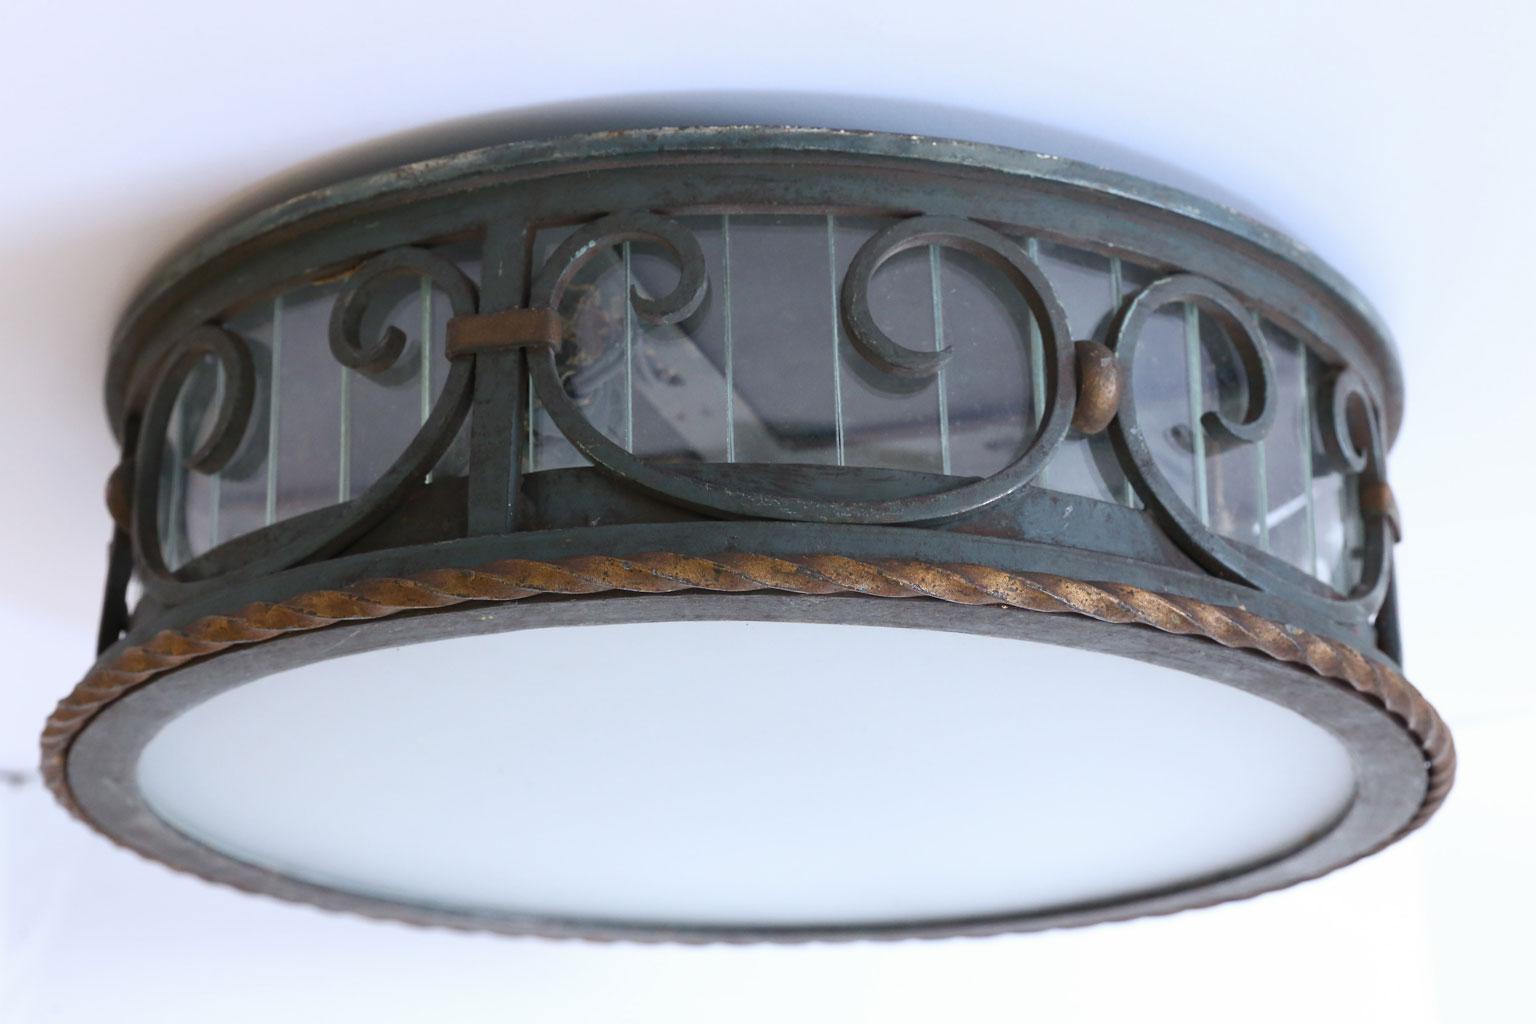 This flushmount fixture is in nice quality and has its original patina. The glass around the gallery was most probably added at some time and the frosted glass bottom is new glass. The light has been wired for the US. It has a classic style that